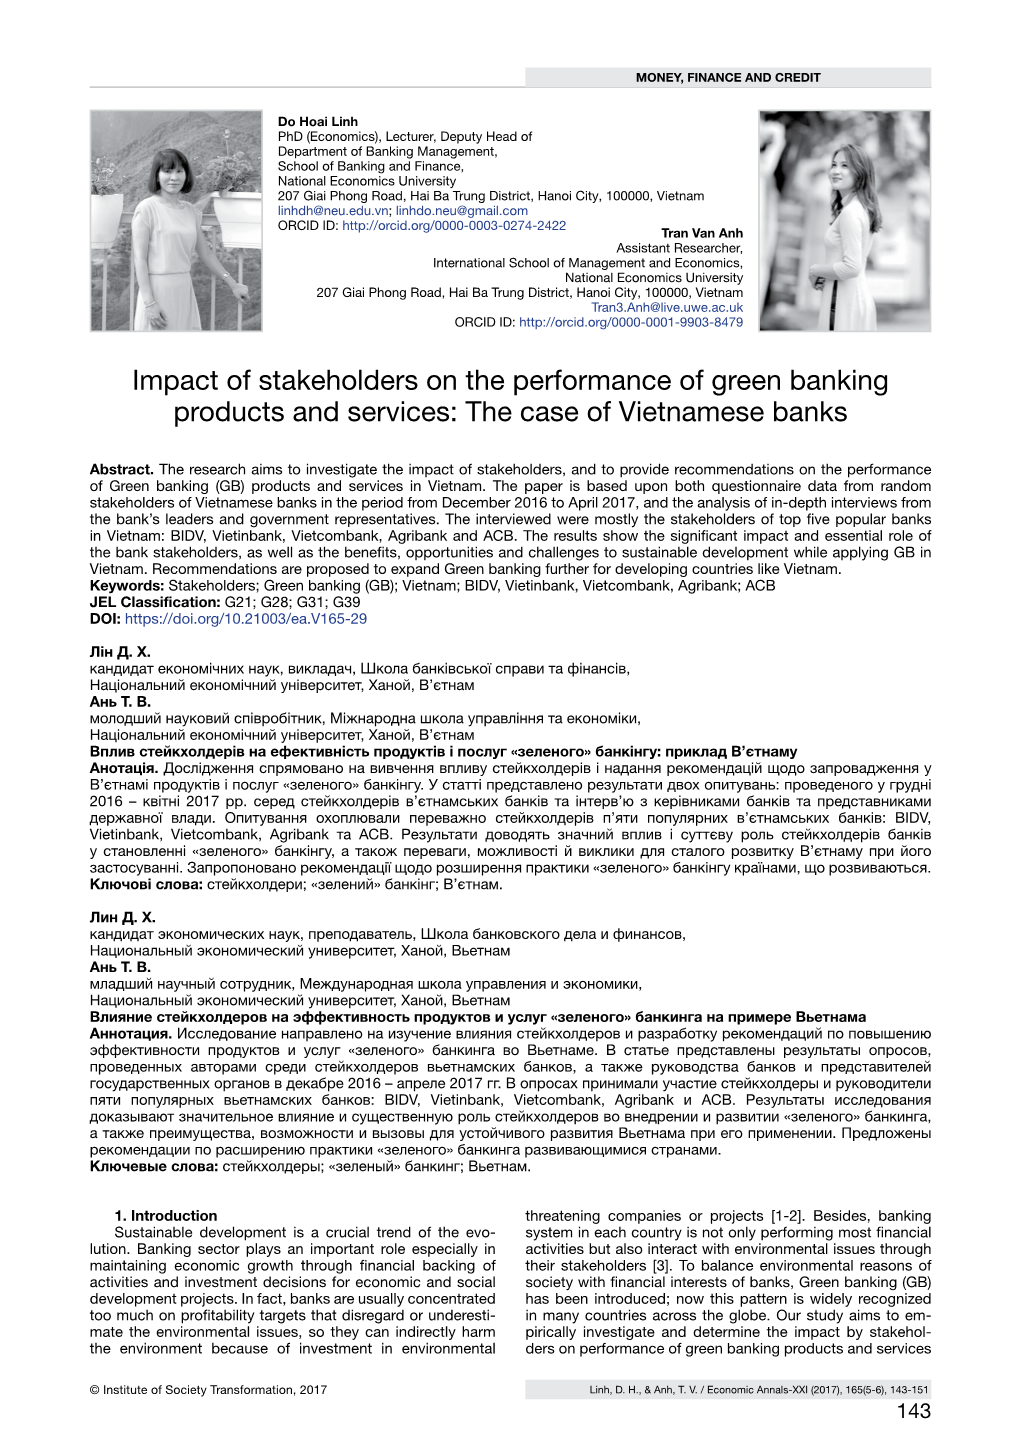 Impact of Stakeholders on the Performance of Green Banking Products and Services: the Case of Vietnamese Banks